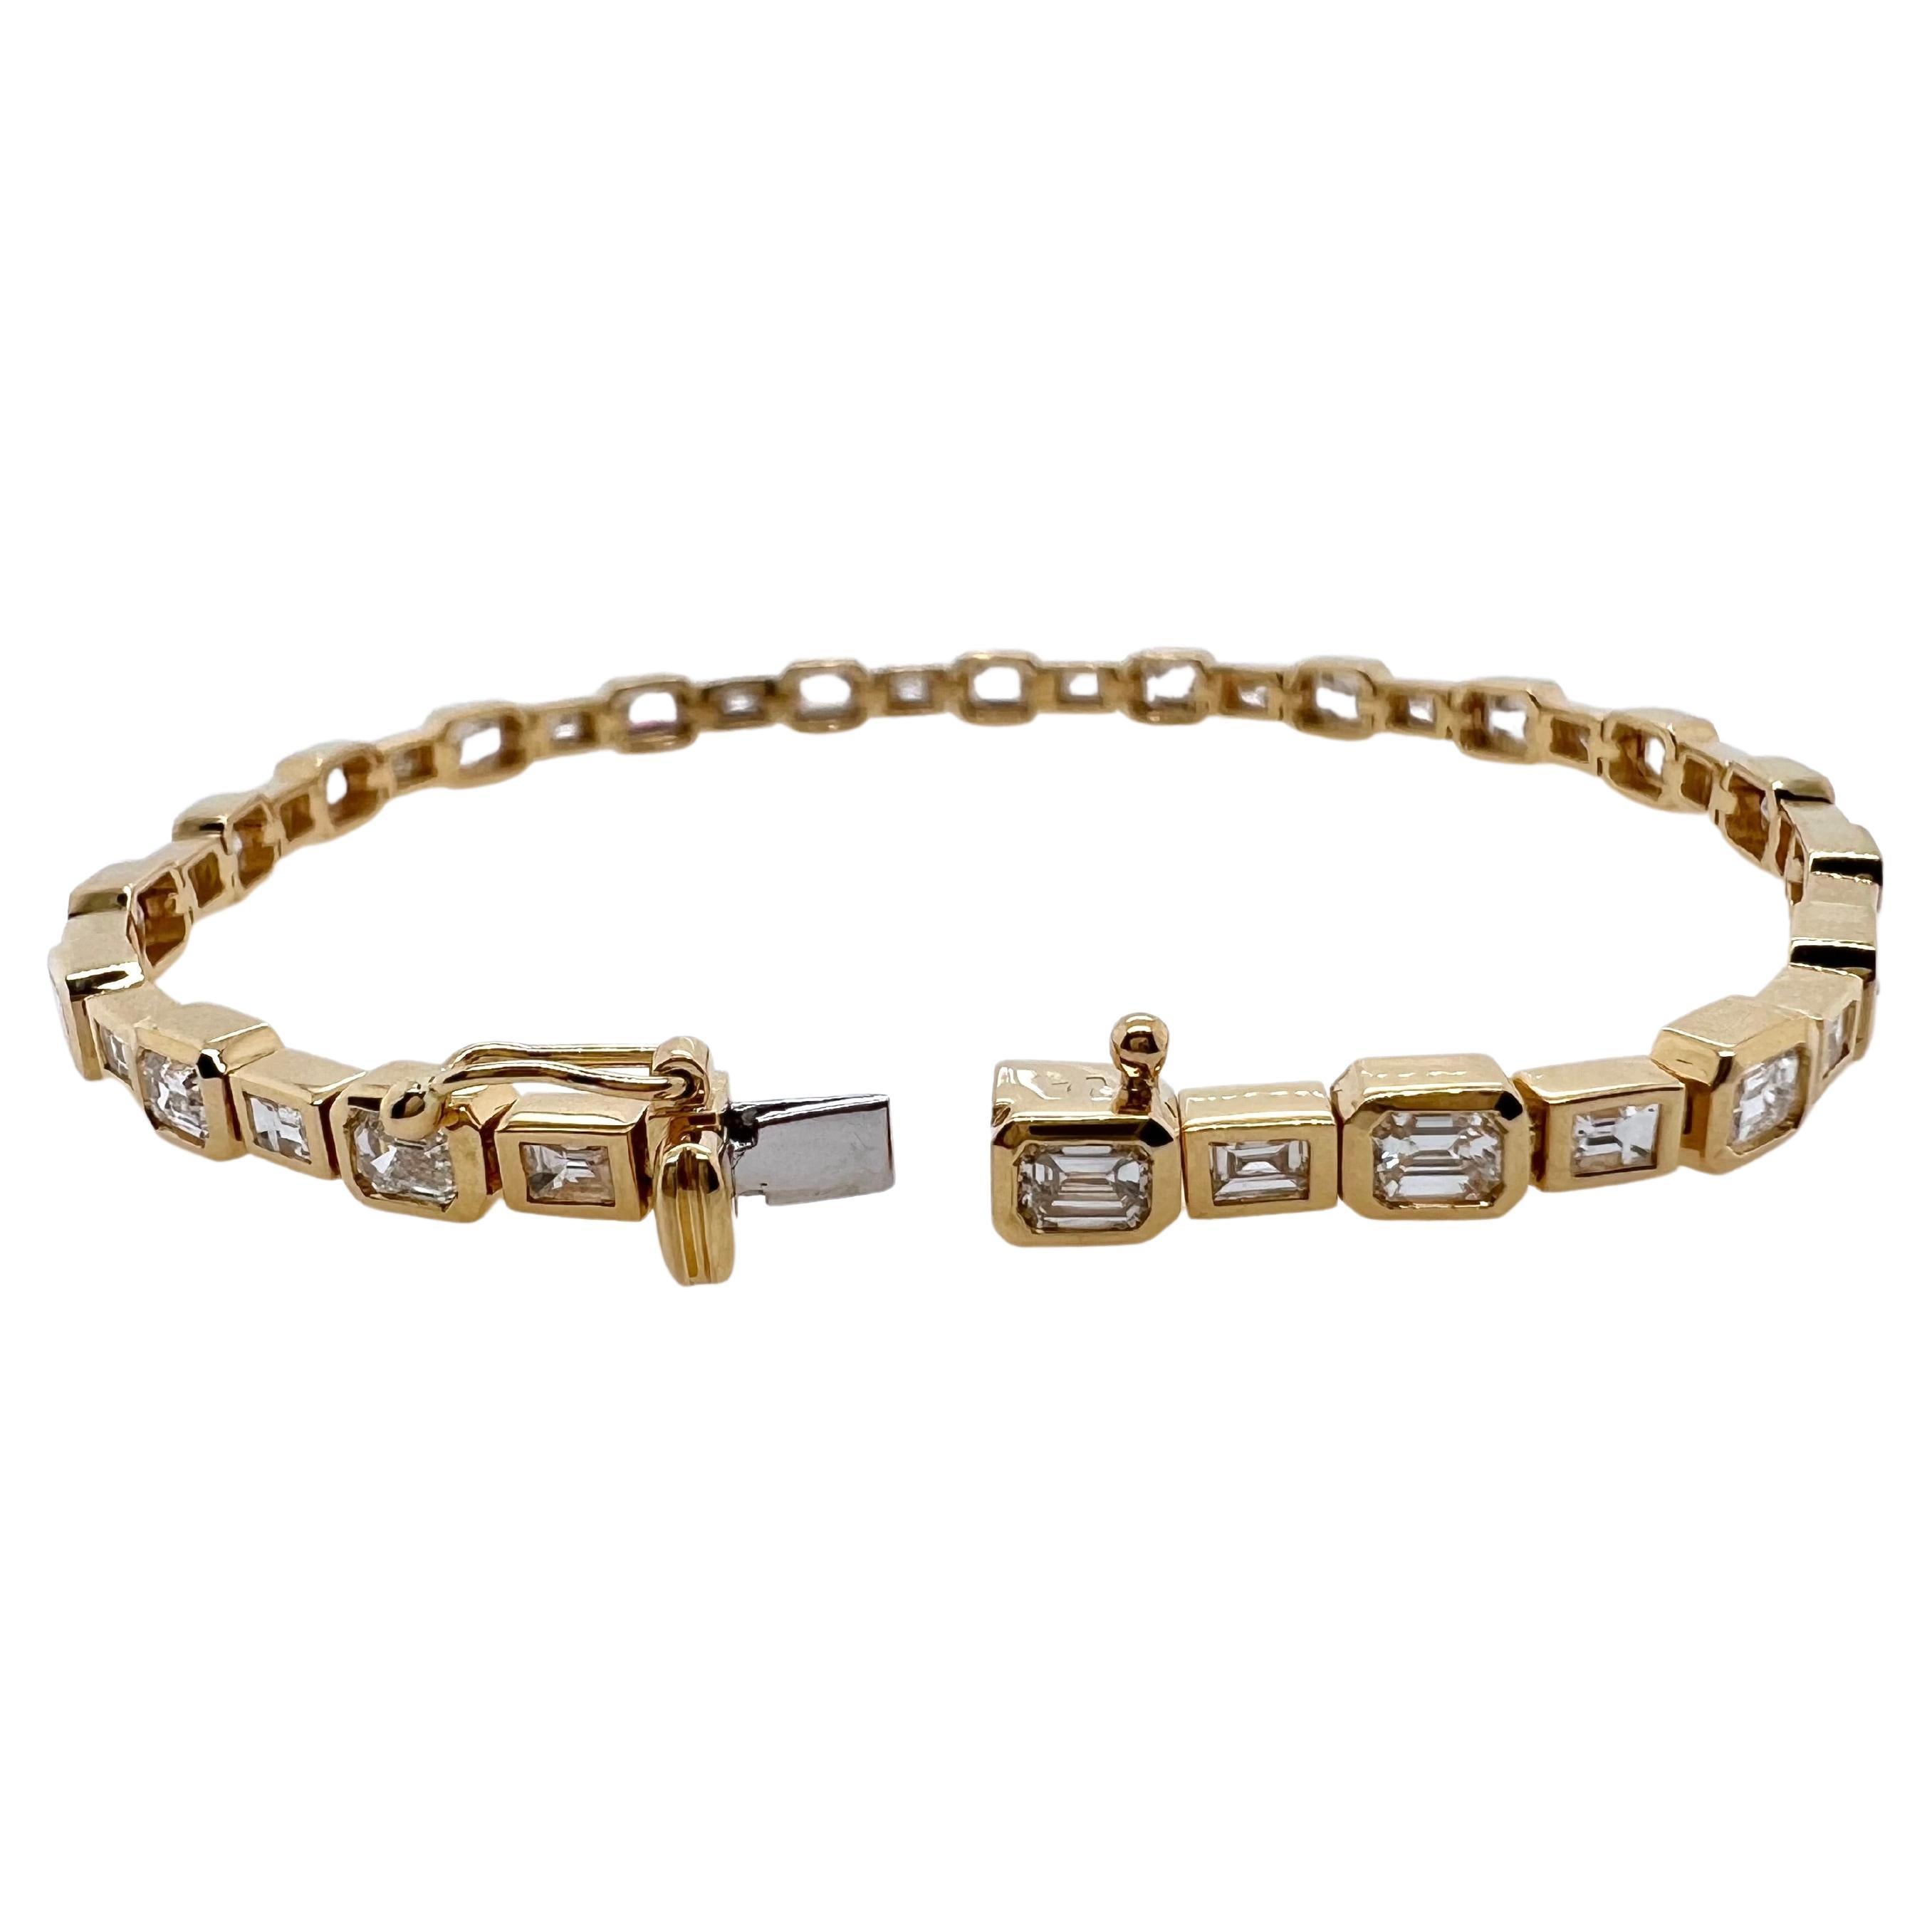 This stunning diamond tennis bracelet is comprised of emerald cut diamonds and baguette diamonds that are
bezel set in an alternating pattern.  The variation in sizes gives the bracelet a unique, contemporary look.  It can be
worn daily and will be